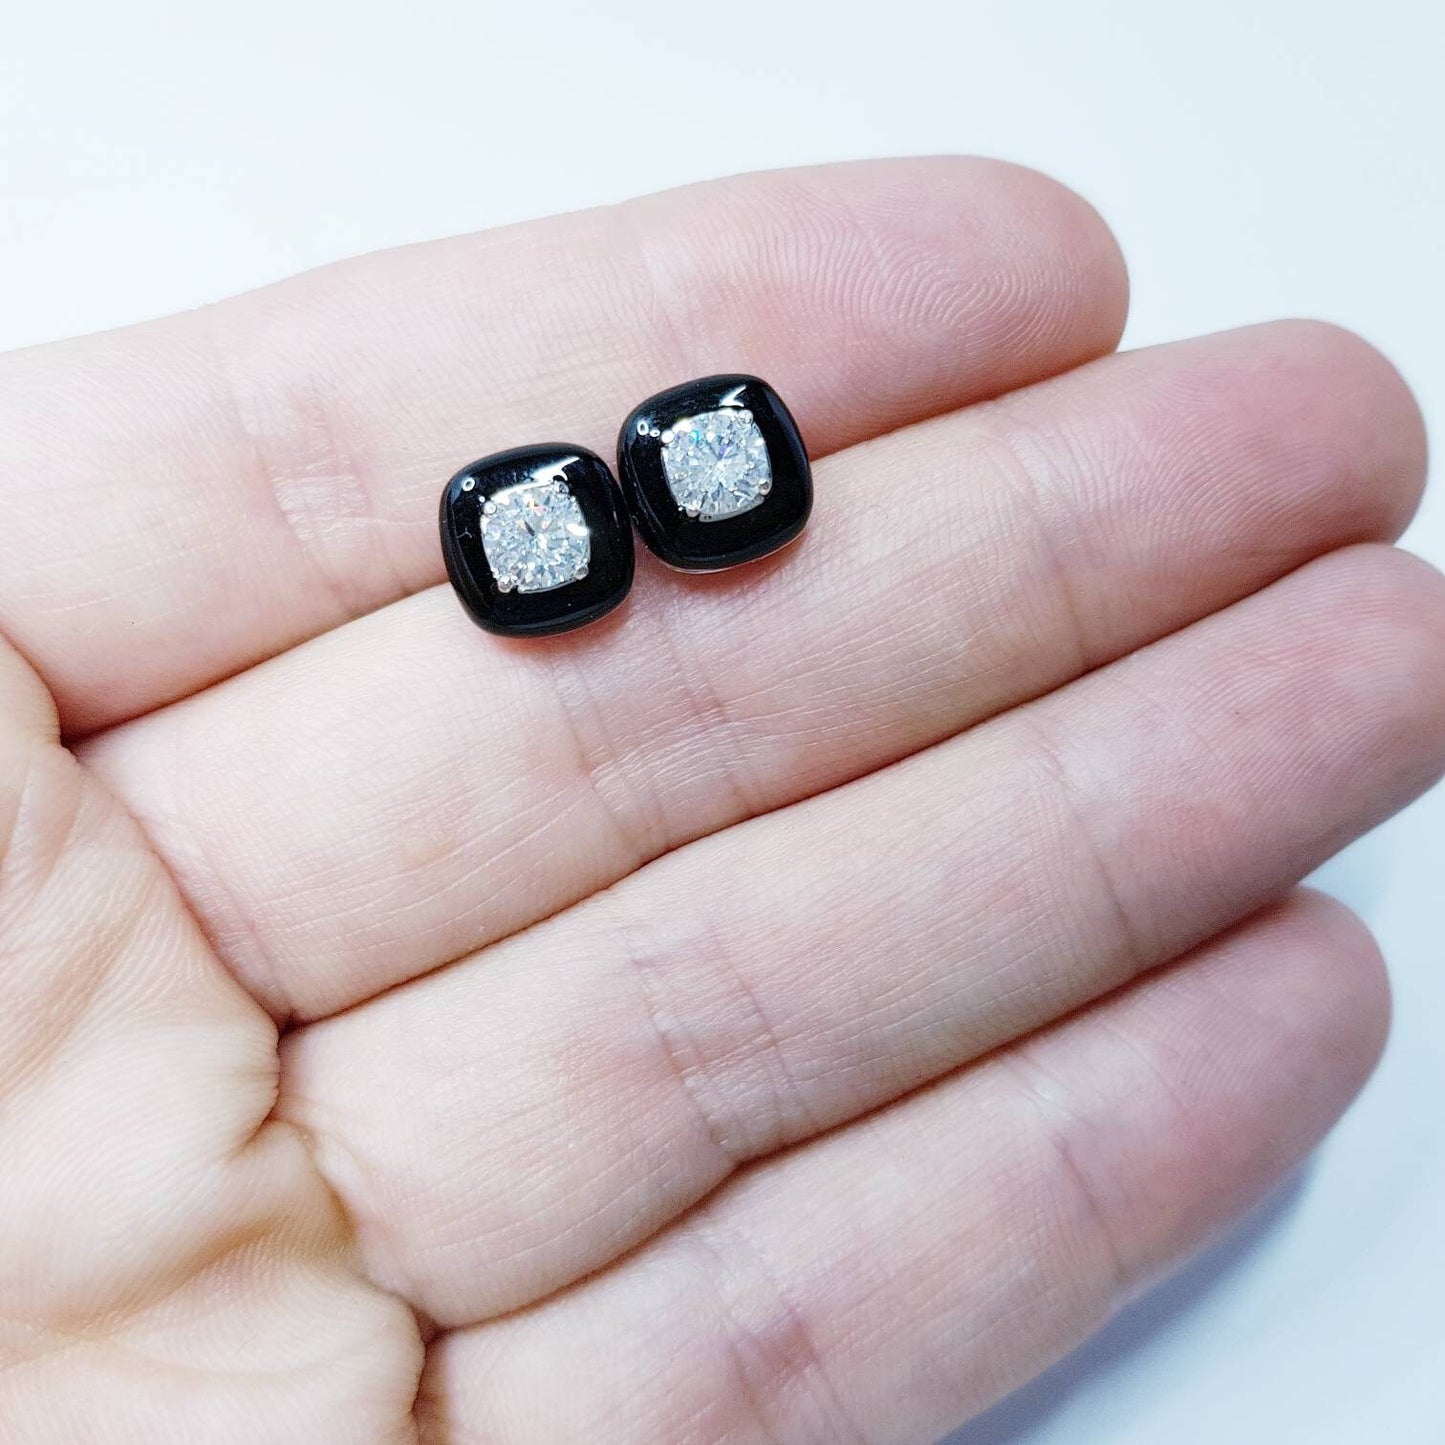 Black earrings, square black studs, silver stud earrings, diamond simulant earrings, enamel earrings, black and white vintage jewelry